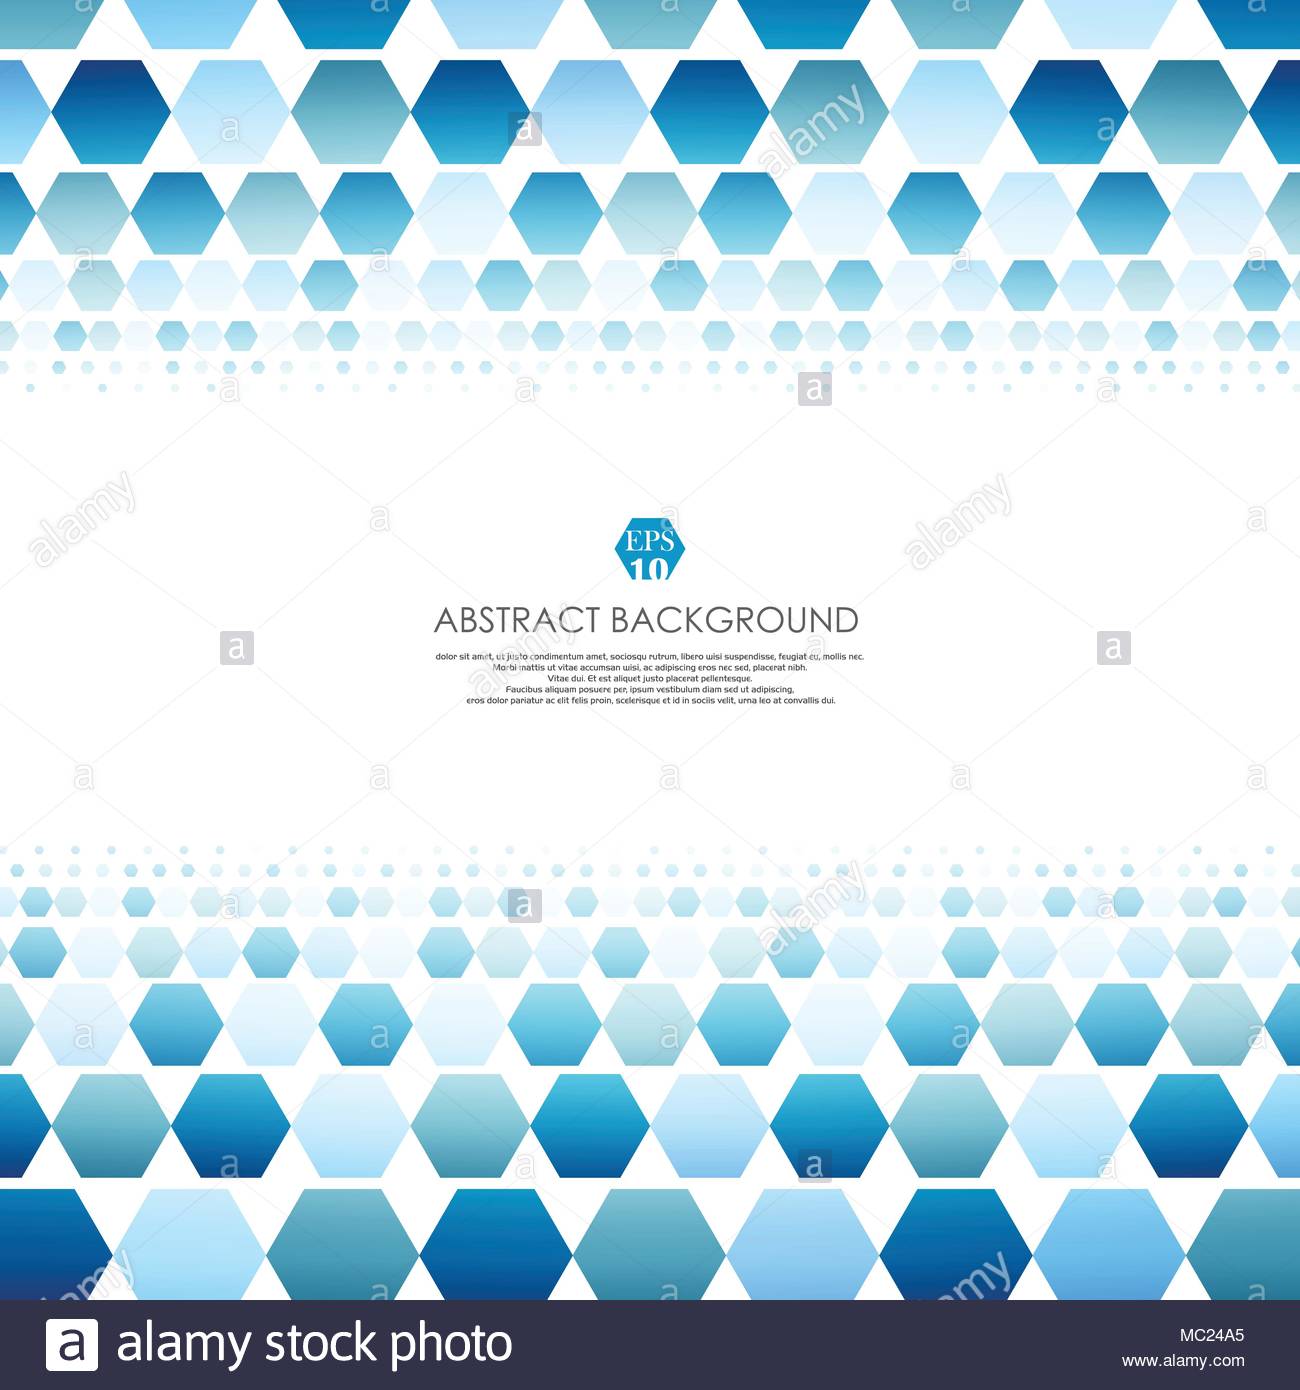 Art Of Blue Molecules Abstract Background For Business